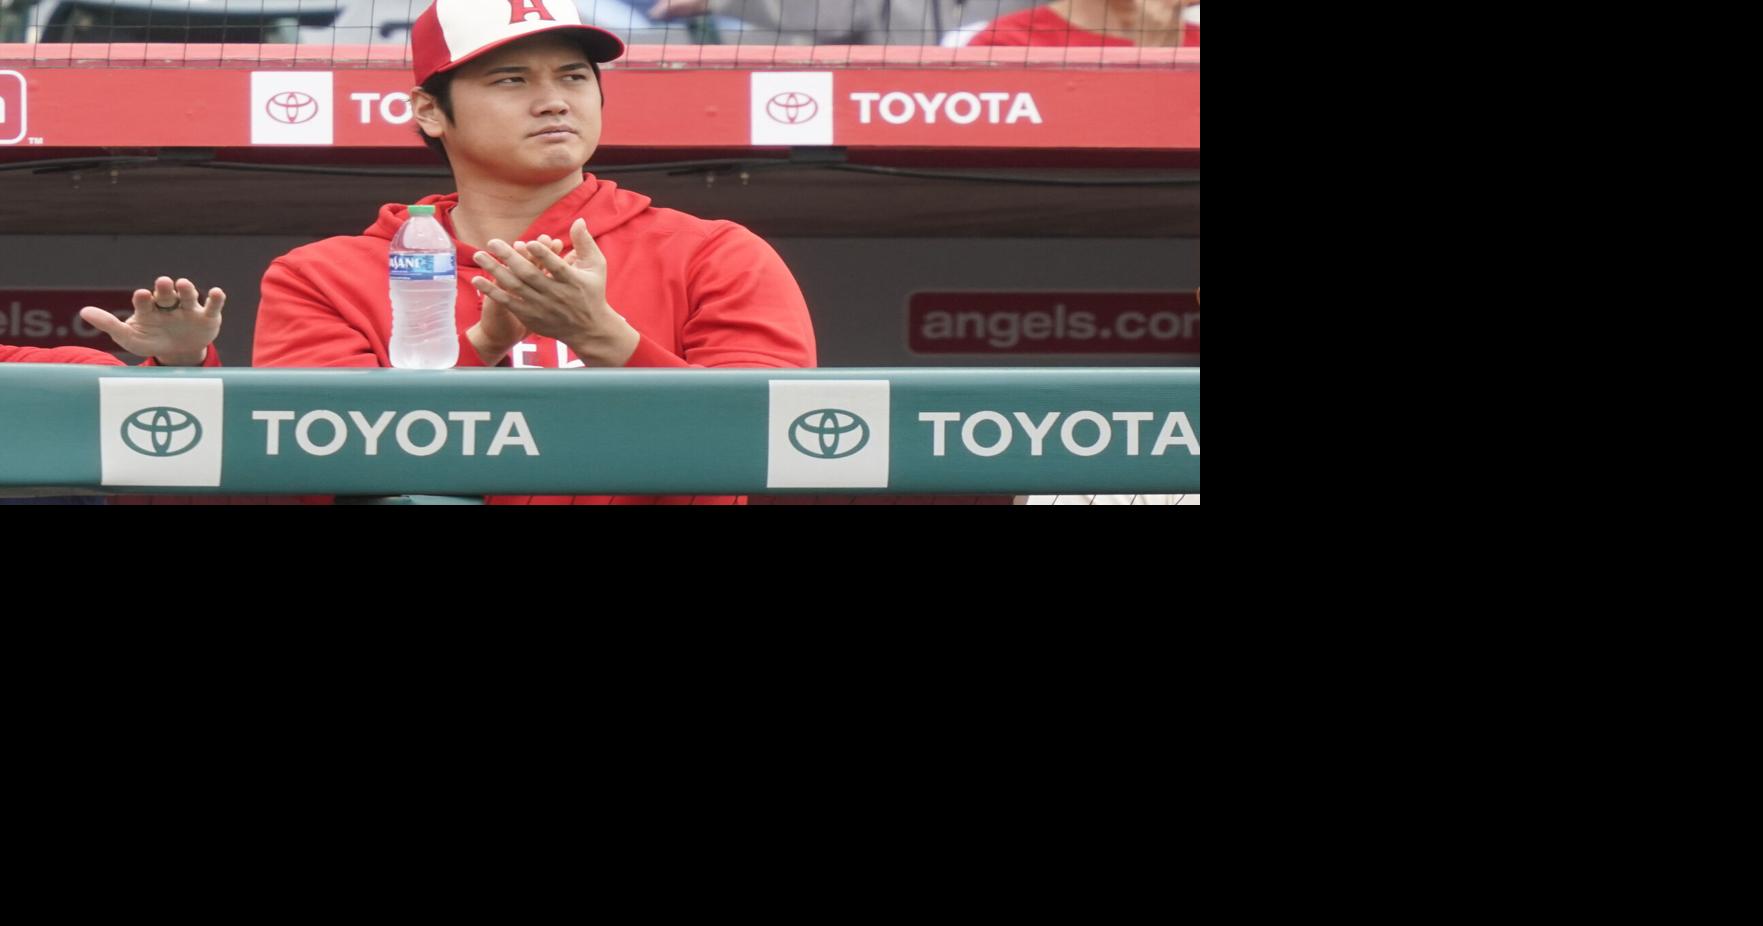 Shohei Ohtani's free agency the buzz of the All-Star Game